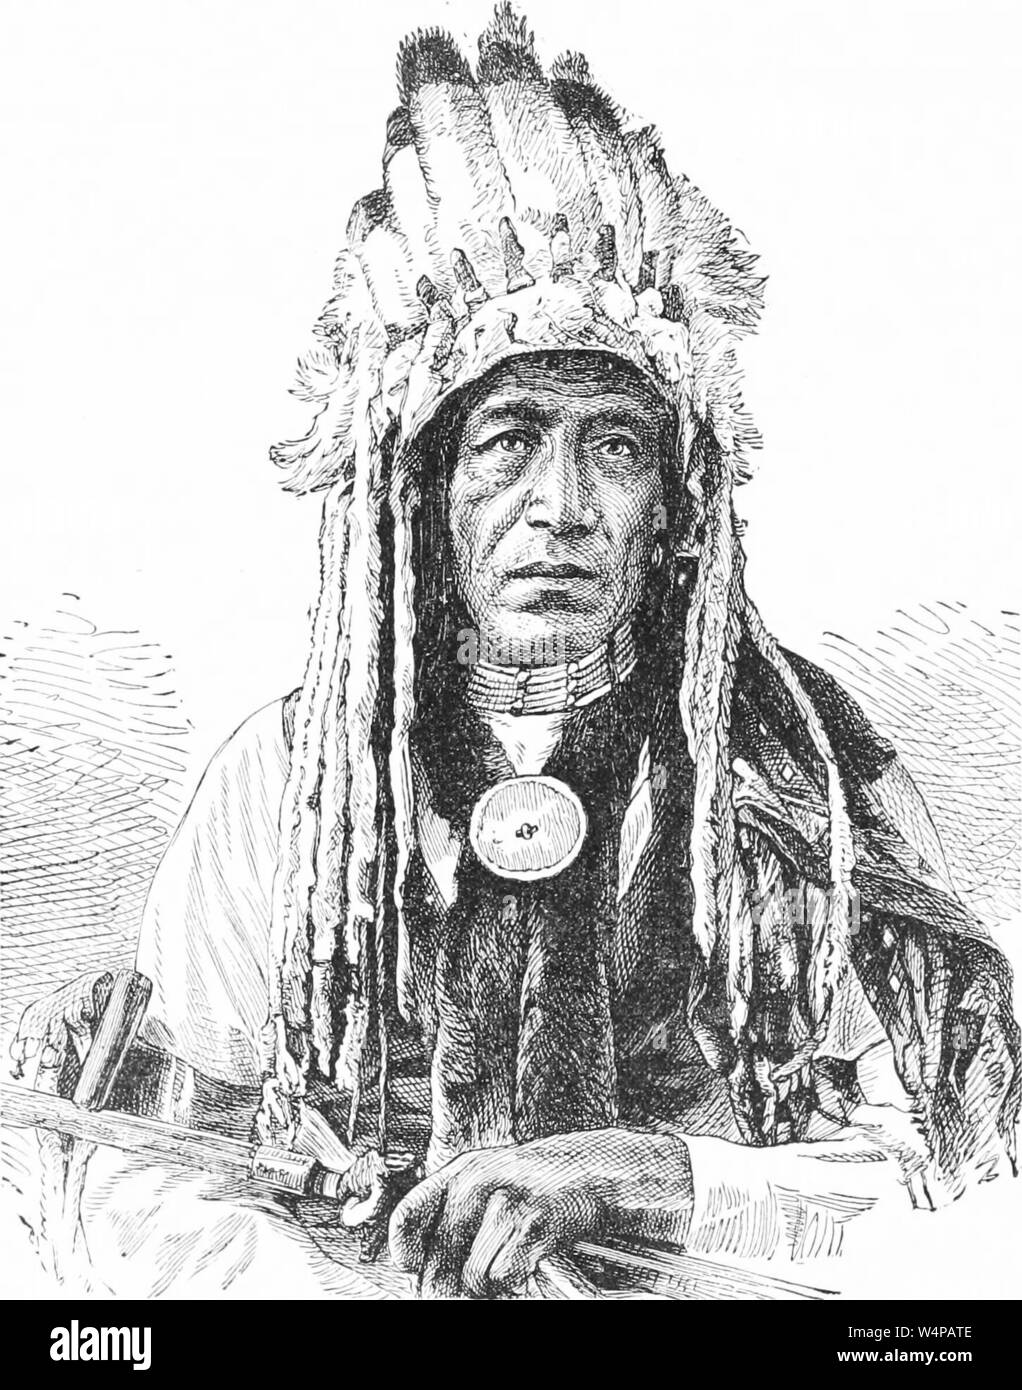 Engraved drawing of the Crow Indians Chief, from the book 'Ridpath's Universal history' by John Clark Ridpath, 1897. Courtesy Internet Archive. () Stock Photo